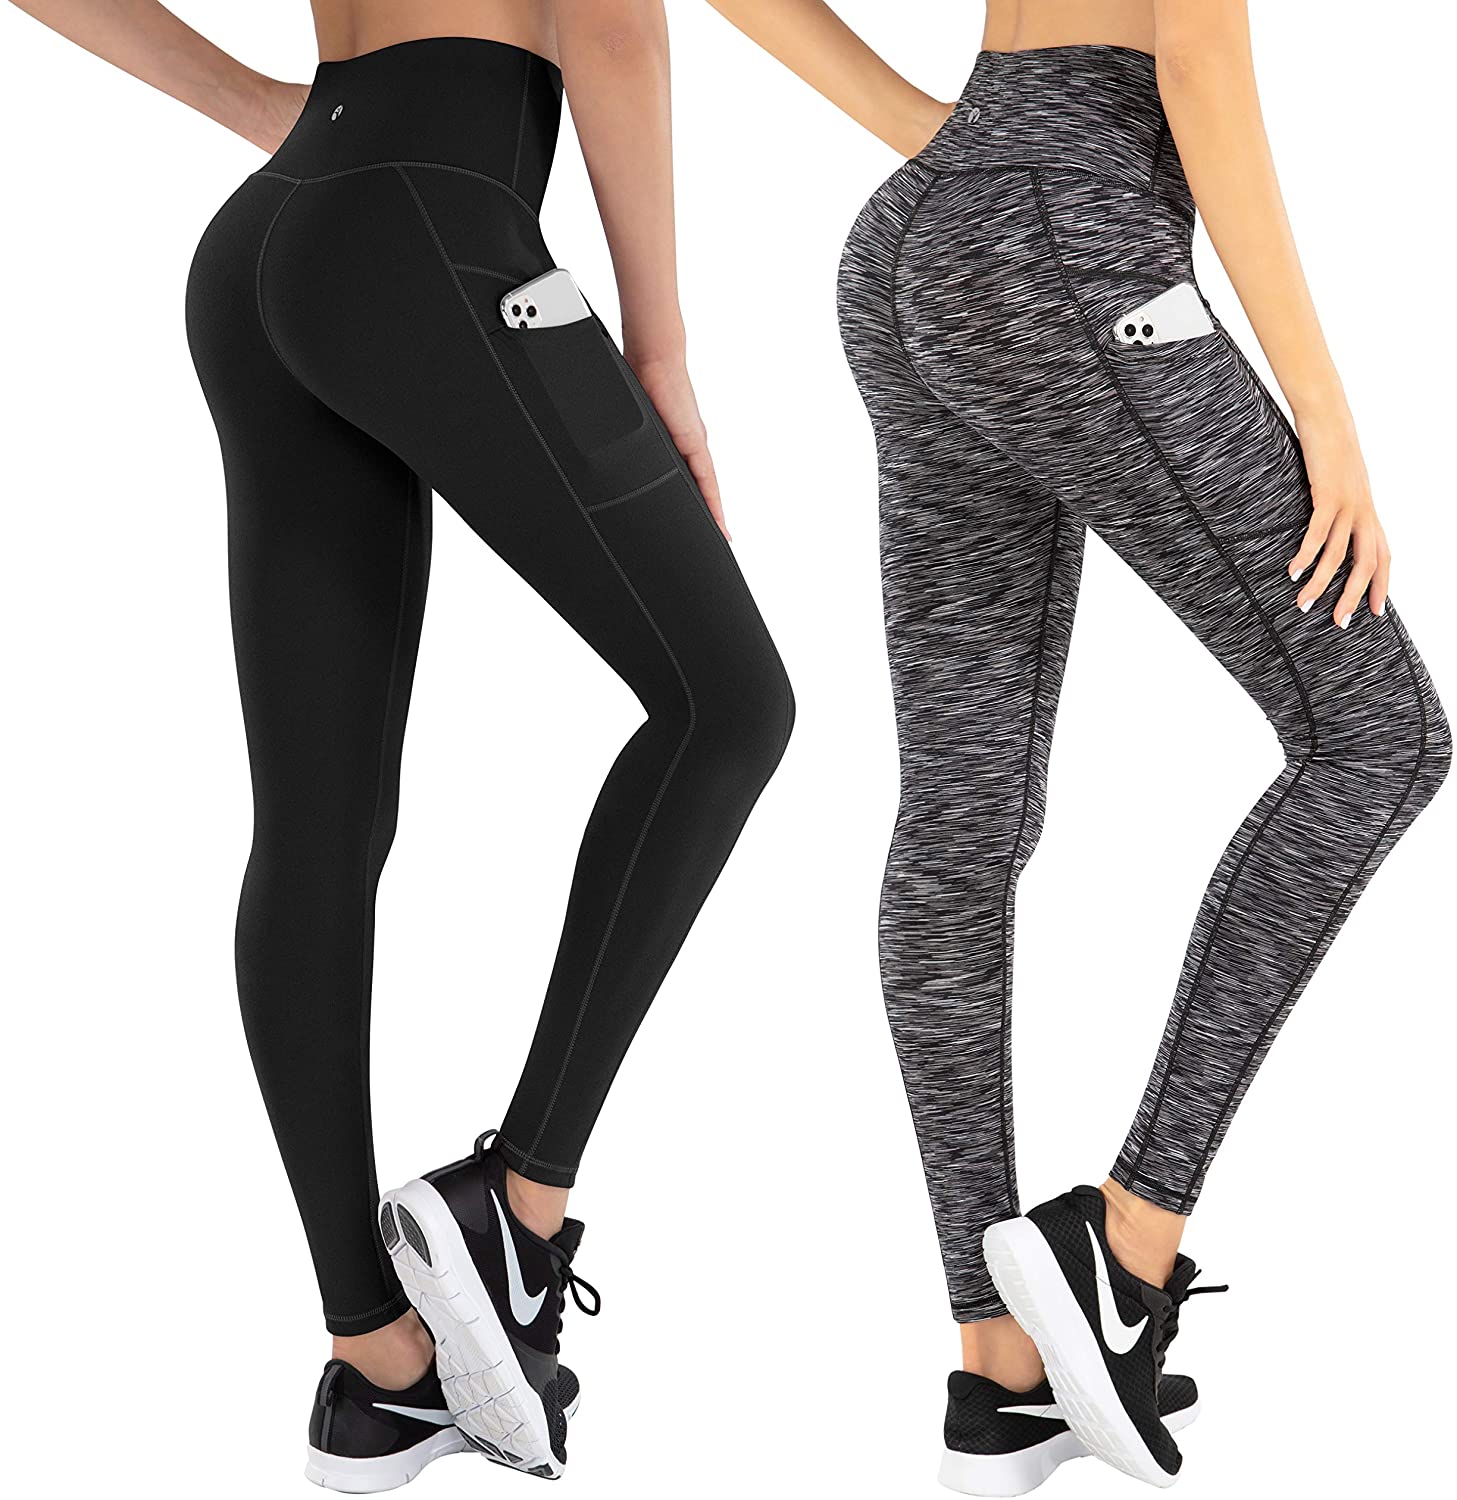 High Waisted Tummy Control Leggings 4 Way Stretch Workout Pants LifeSky Yoga Pants with Pockets 